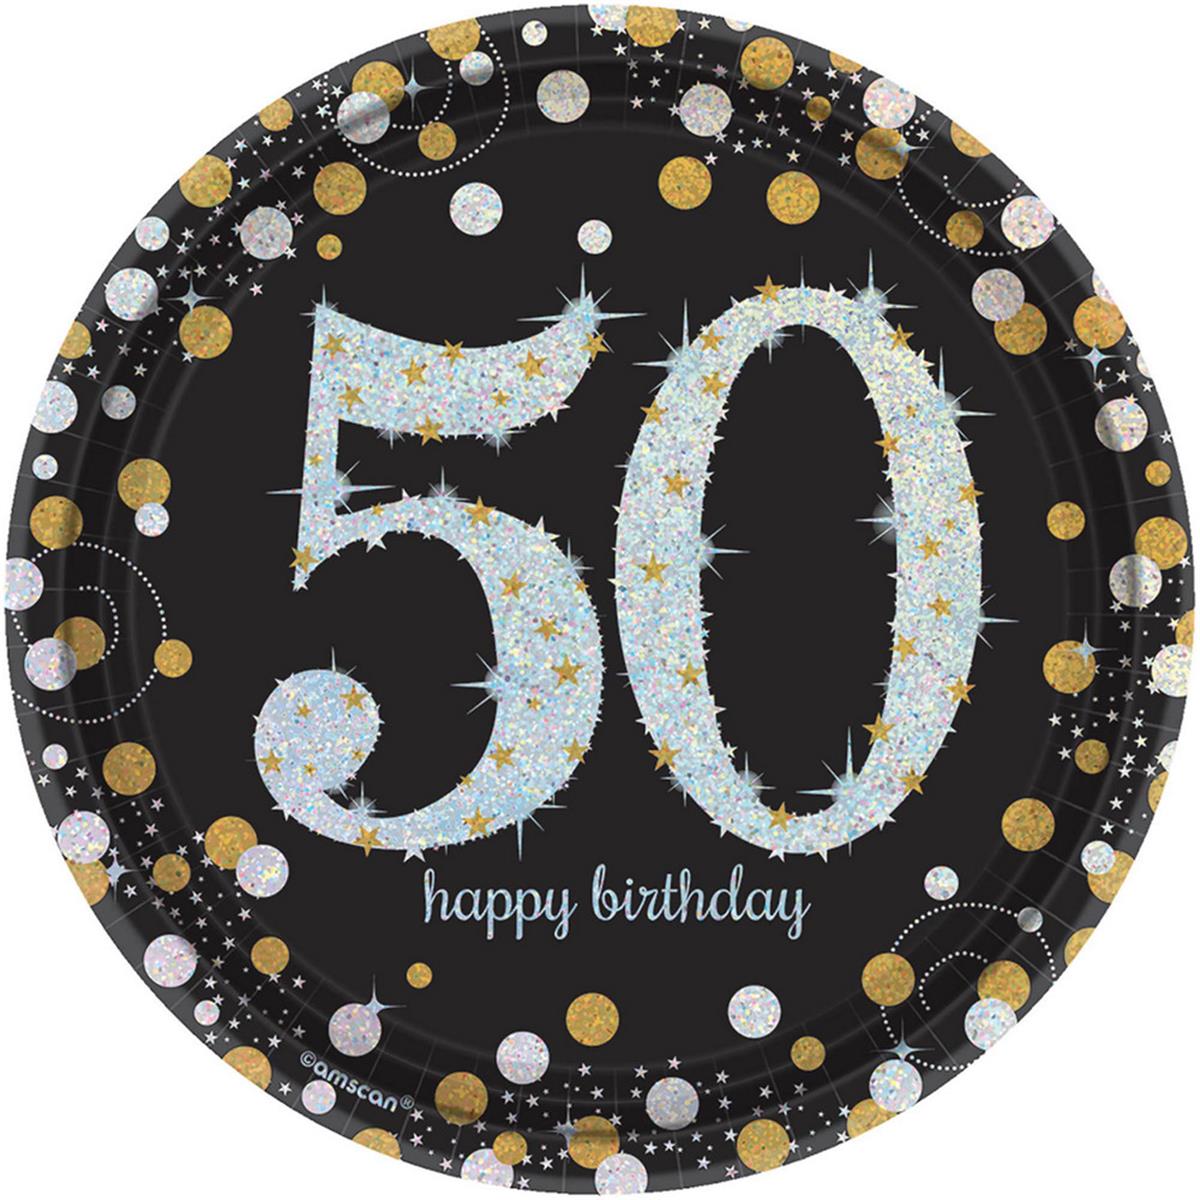 Picture of Amscan 269919 Sparkling 50th Celebration 7 in. Dessert Plates - 8 Piece